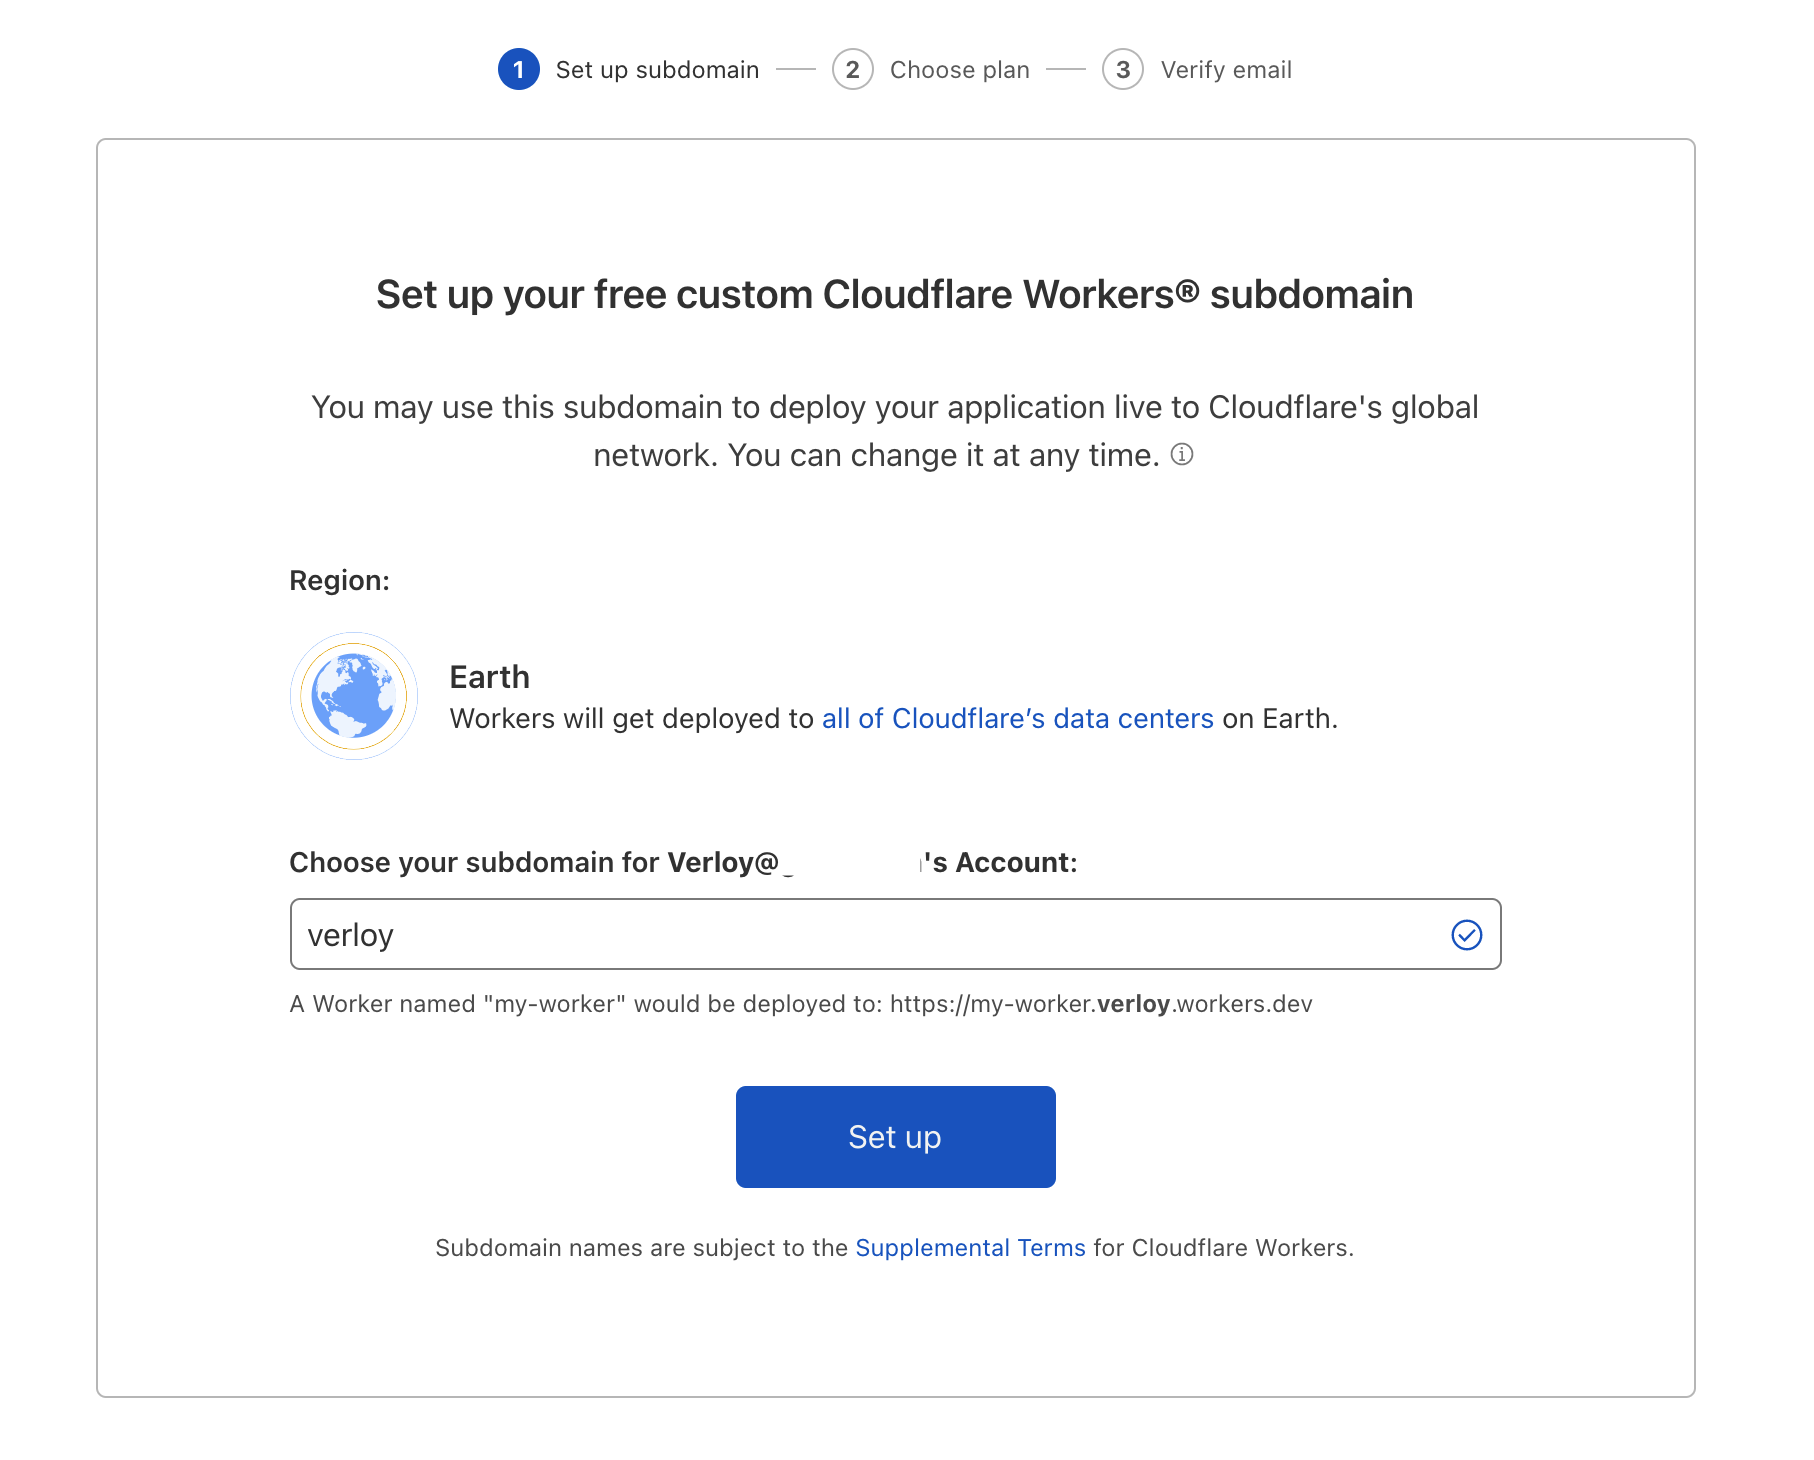 cloudflare3